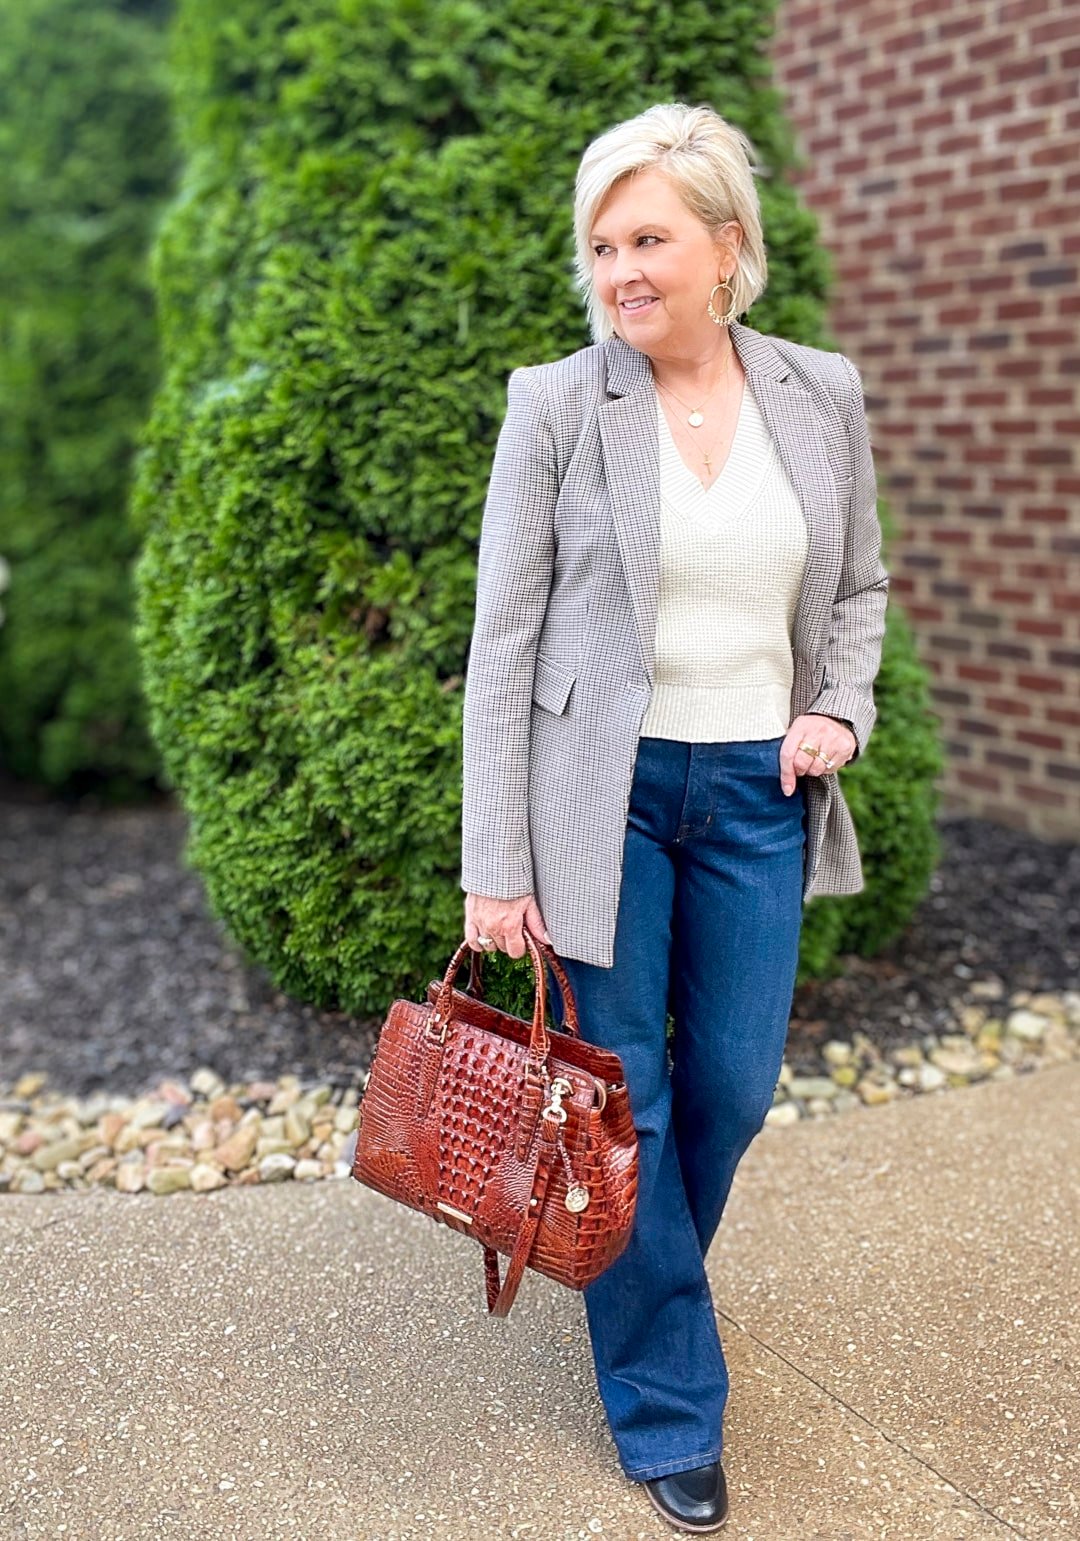 Over 40 Fashion Blogger, Tania Stephens is styling dark wash jeans with a blazer for fall4